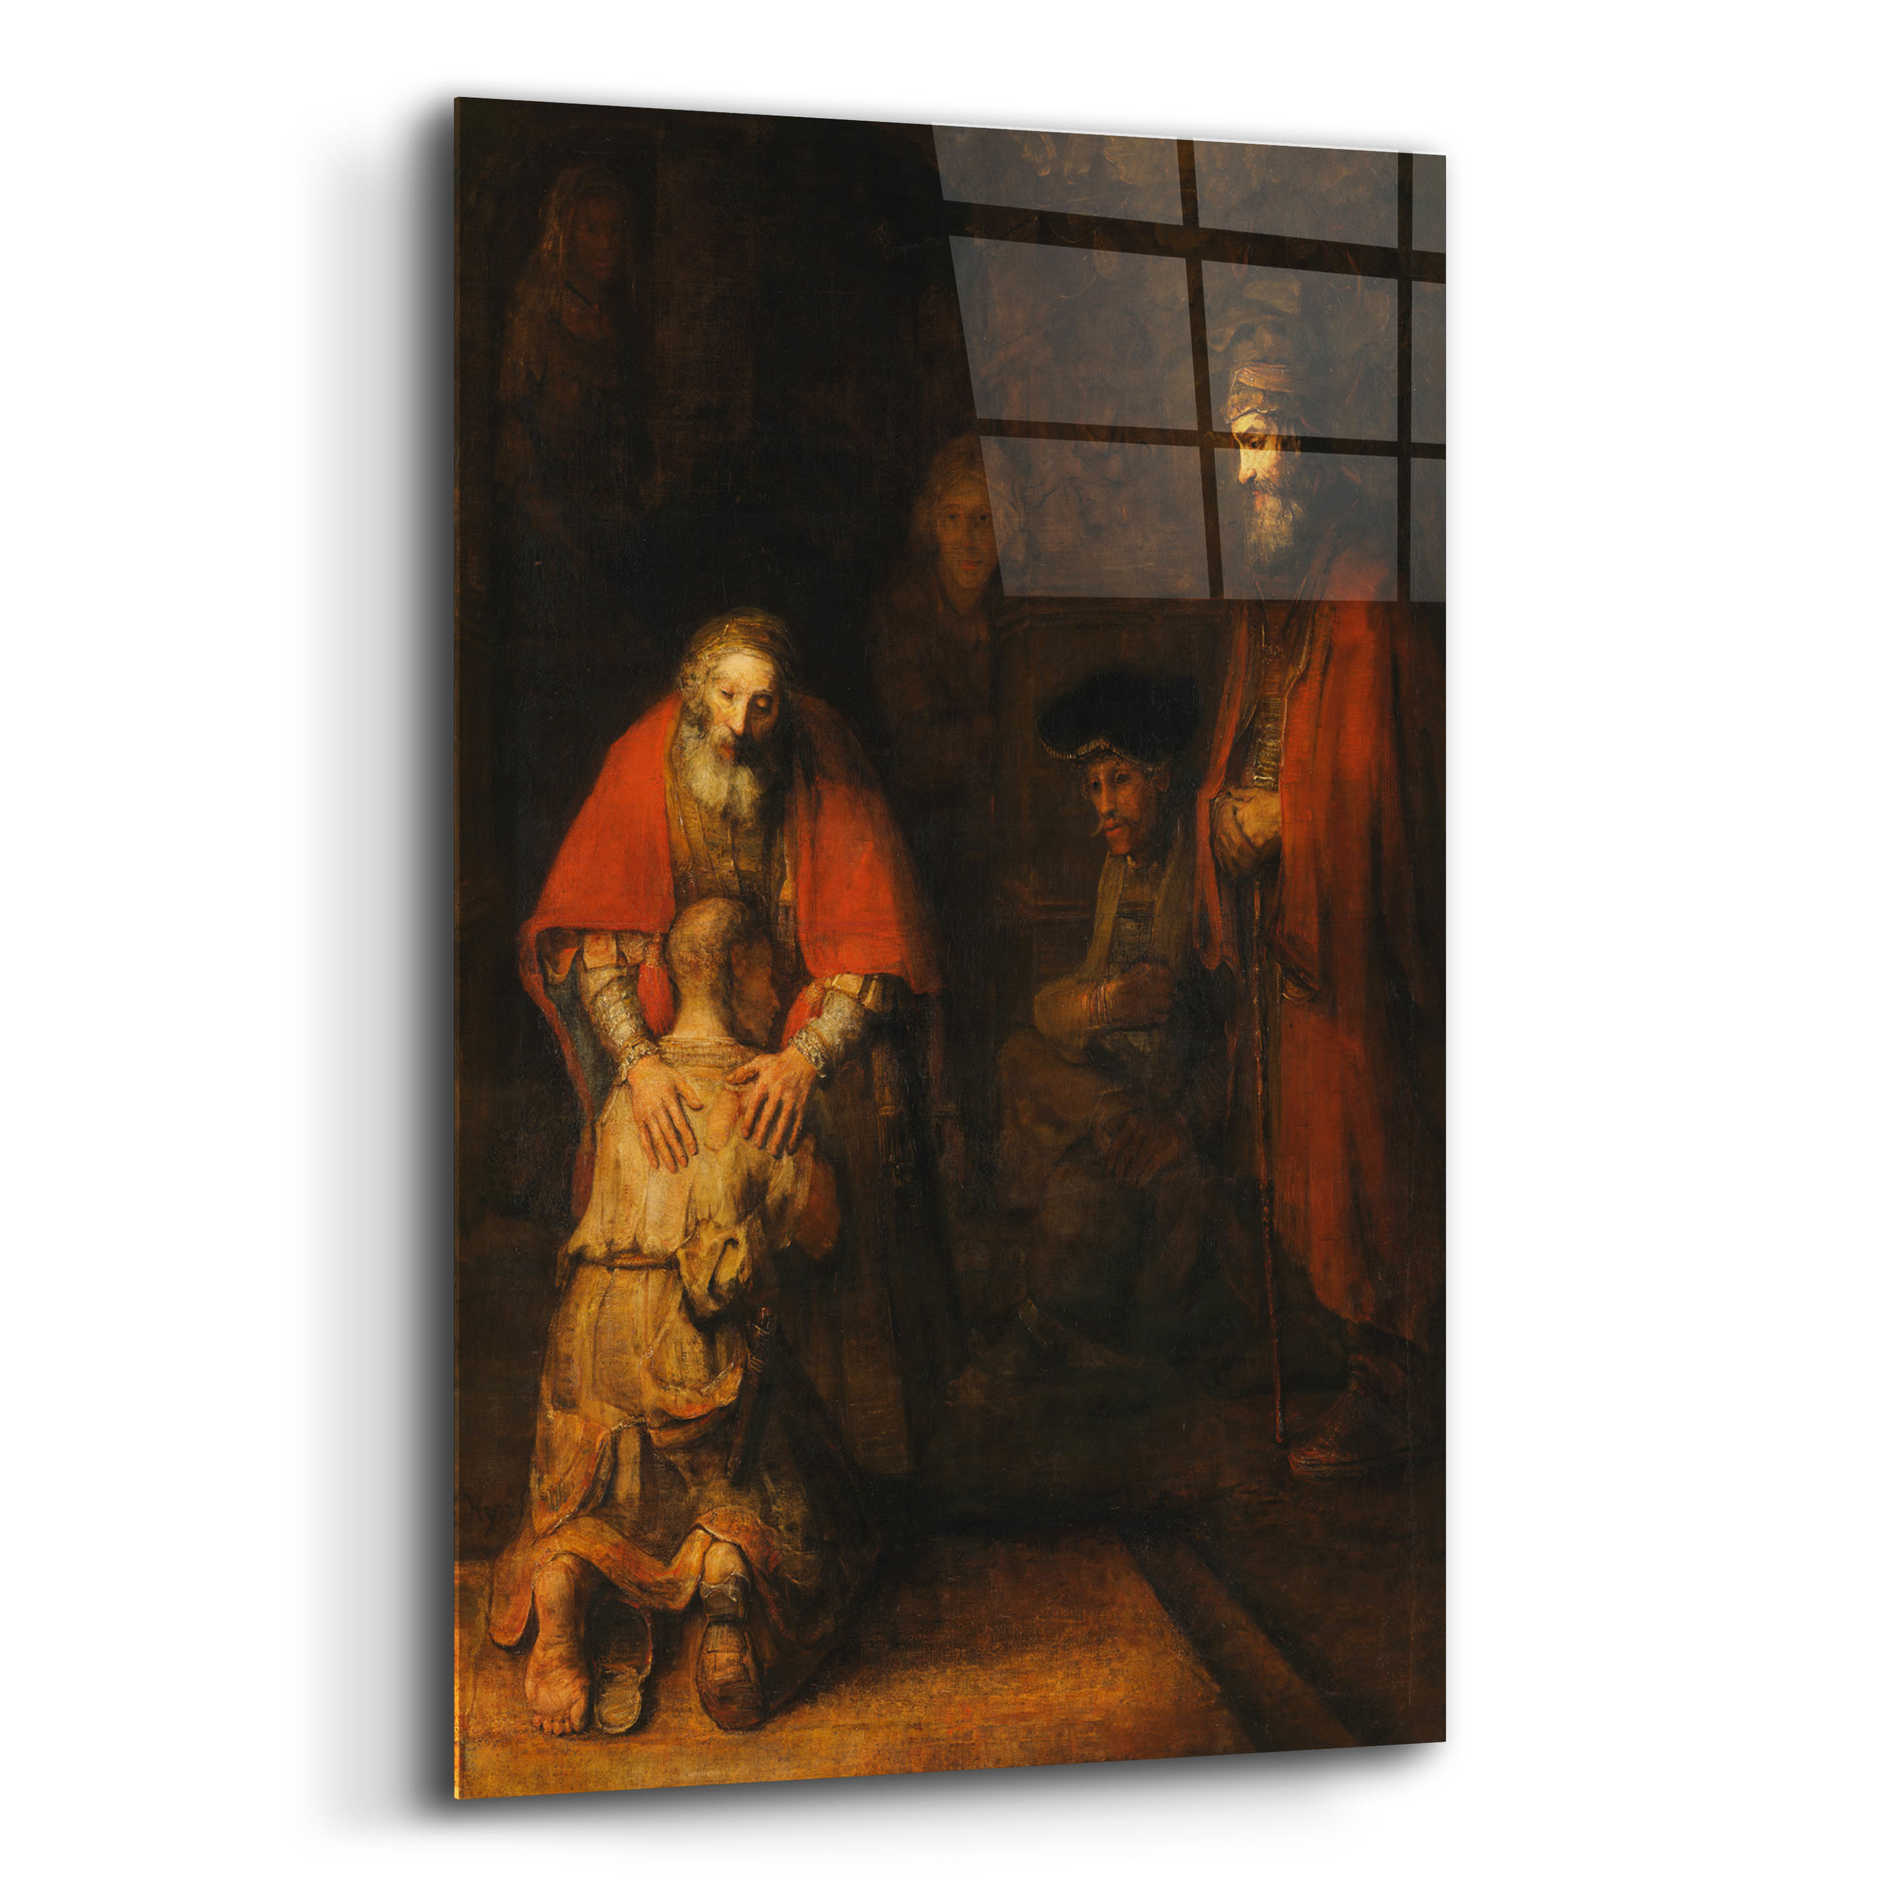 Epic Art 'The Return of the Prodigal Son' by Rembrandt, Acrylic Glass Wall Art,16x24